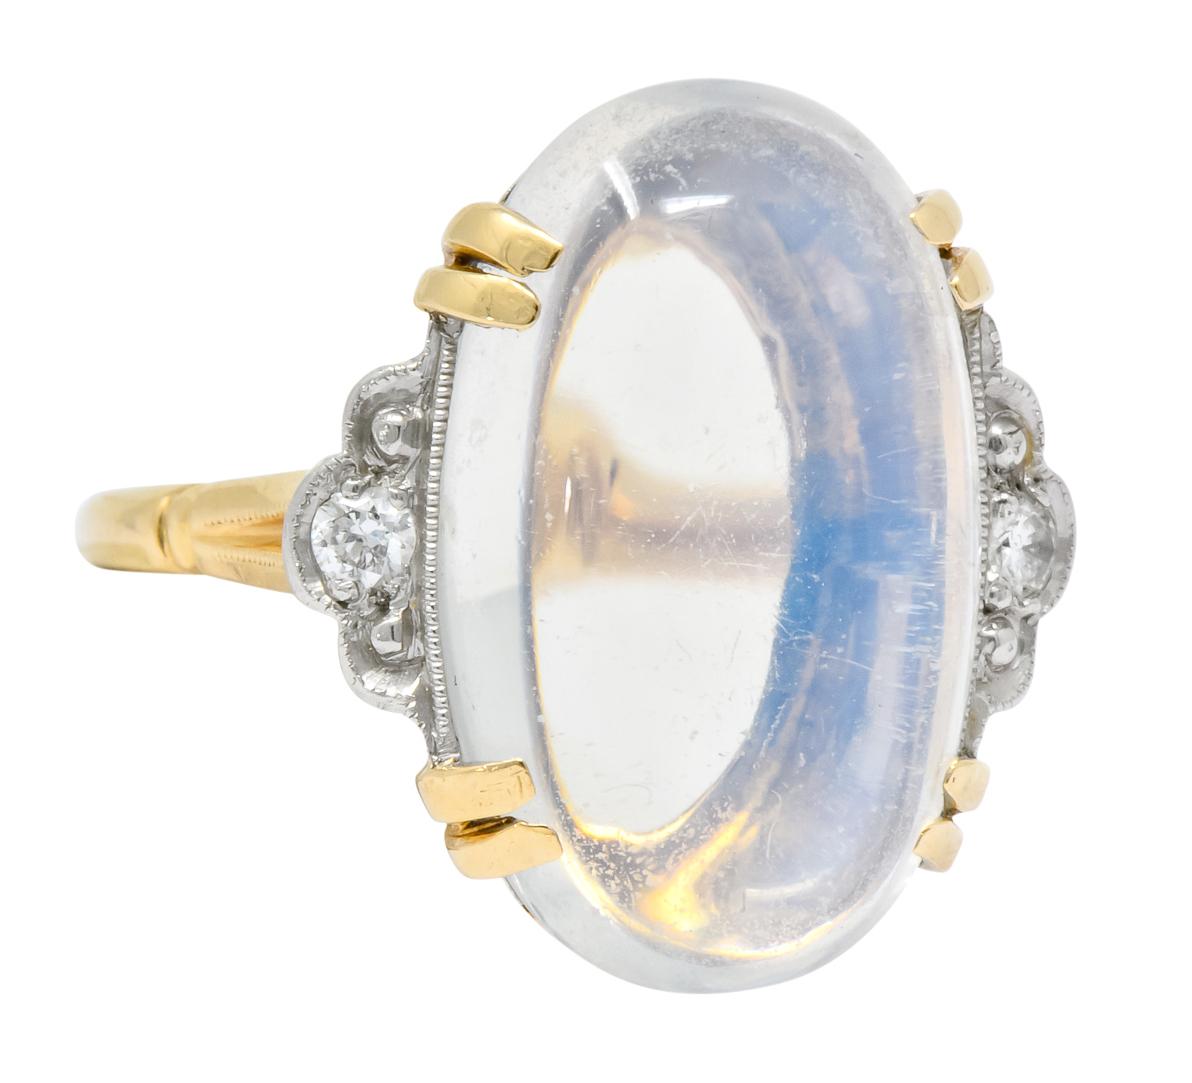 Centering an oval cut cabochon moonstone measuring approximately 7/8 x 9/16 inch, transparent with slight blue adularescence

Flanked by platinum scallop detail with millegrain, bead set with round brilliant cut diamonds weighing approximately 0.10